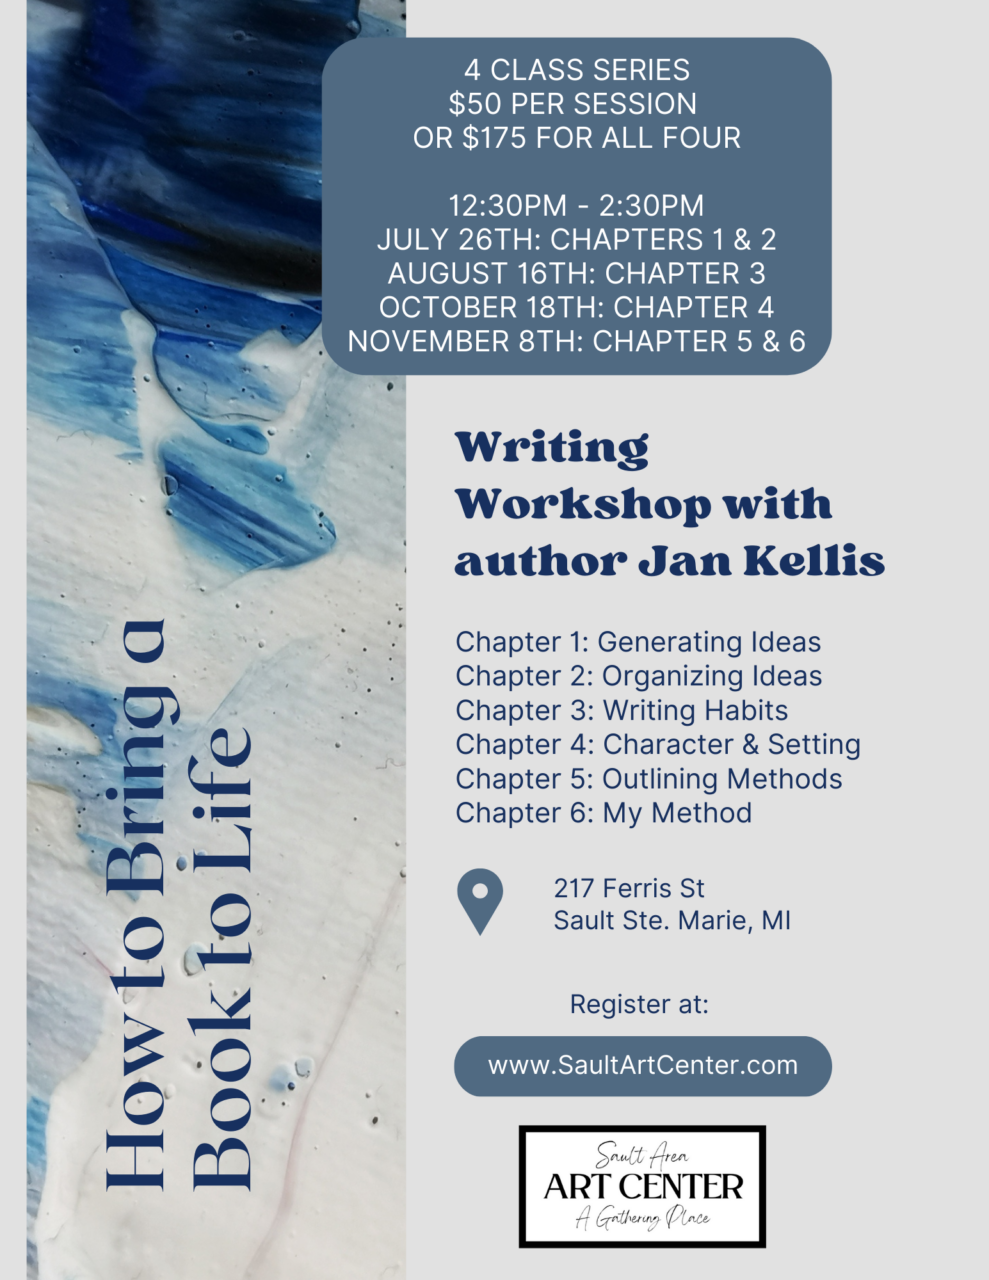 Writing workshop flyer at the sault area arts center